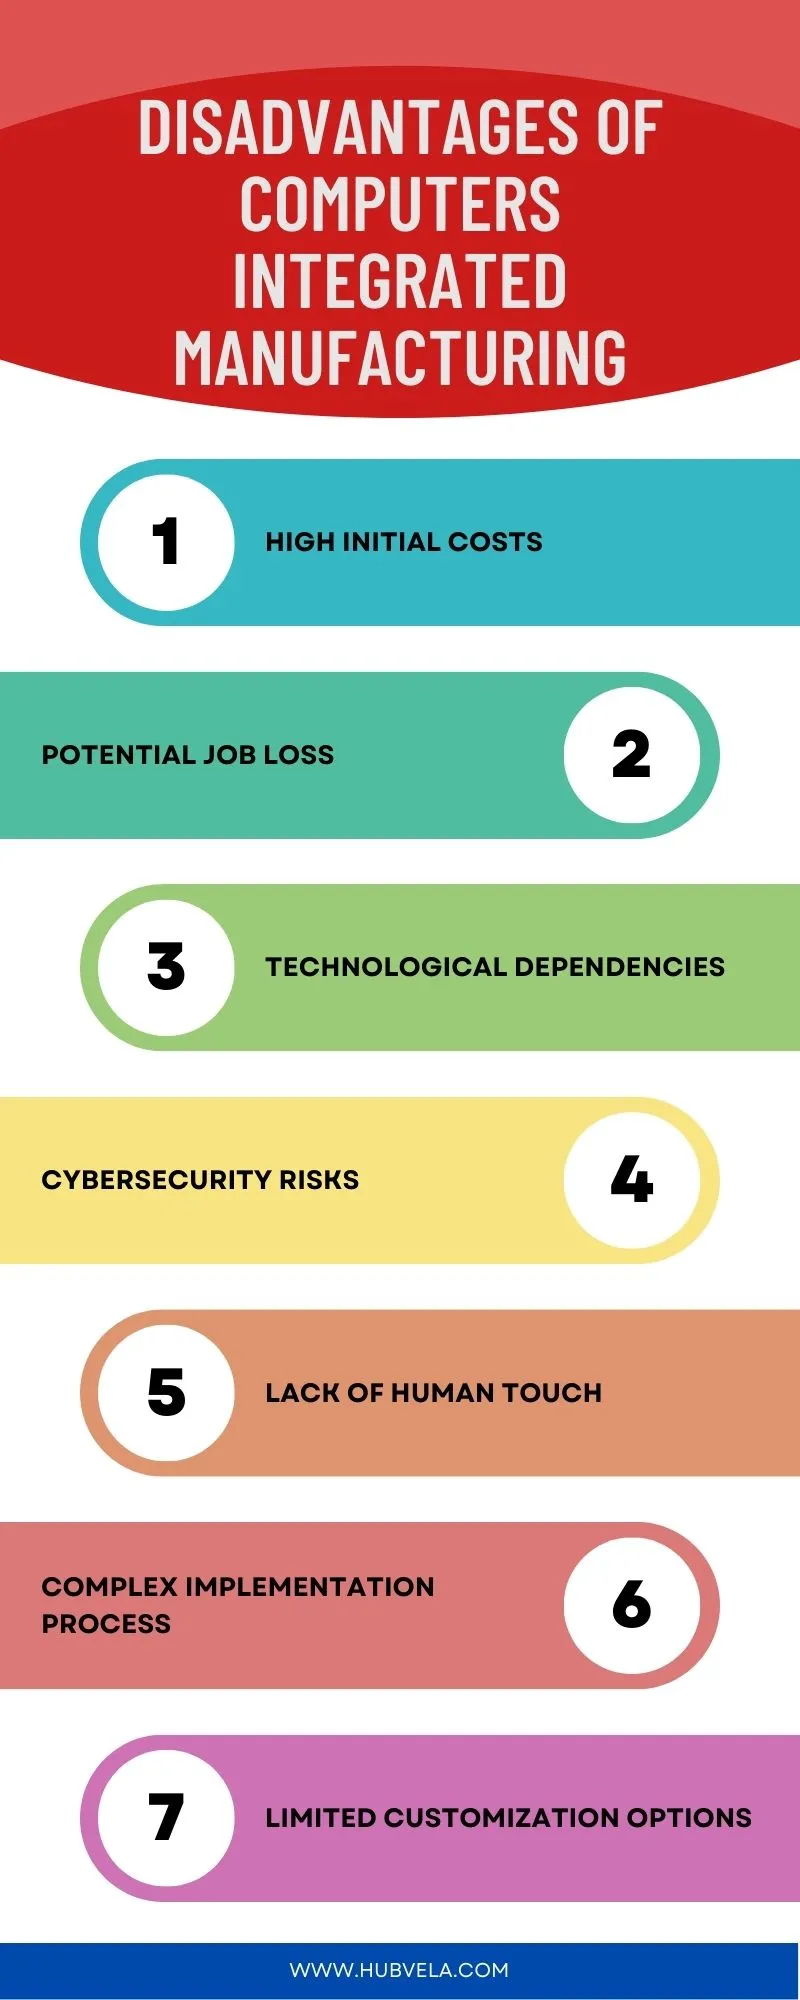 Disadvantages of Computers Integrated Manufacturing Infographic